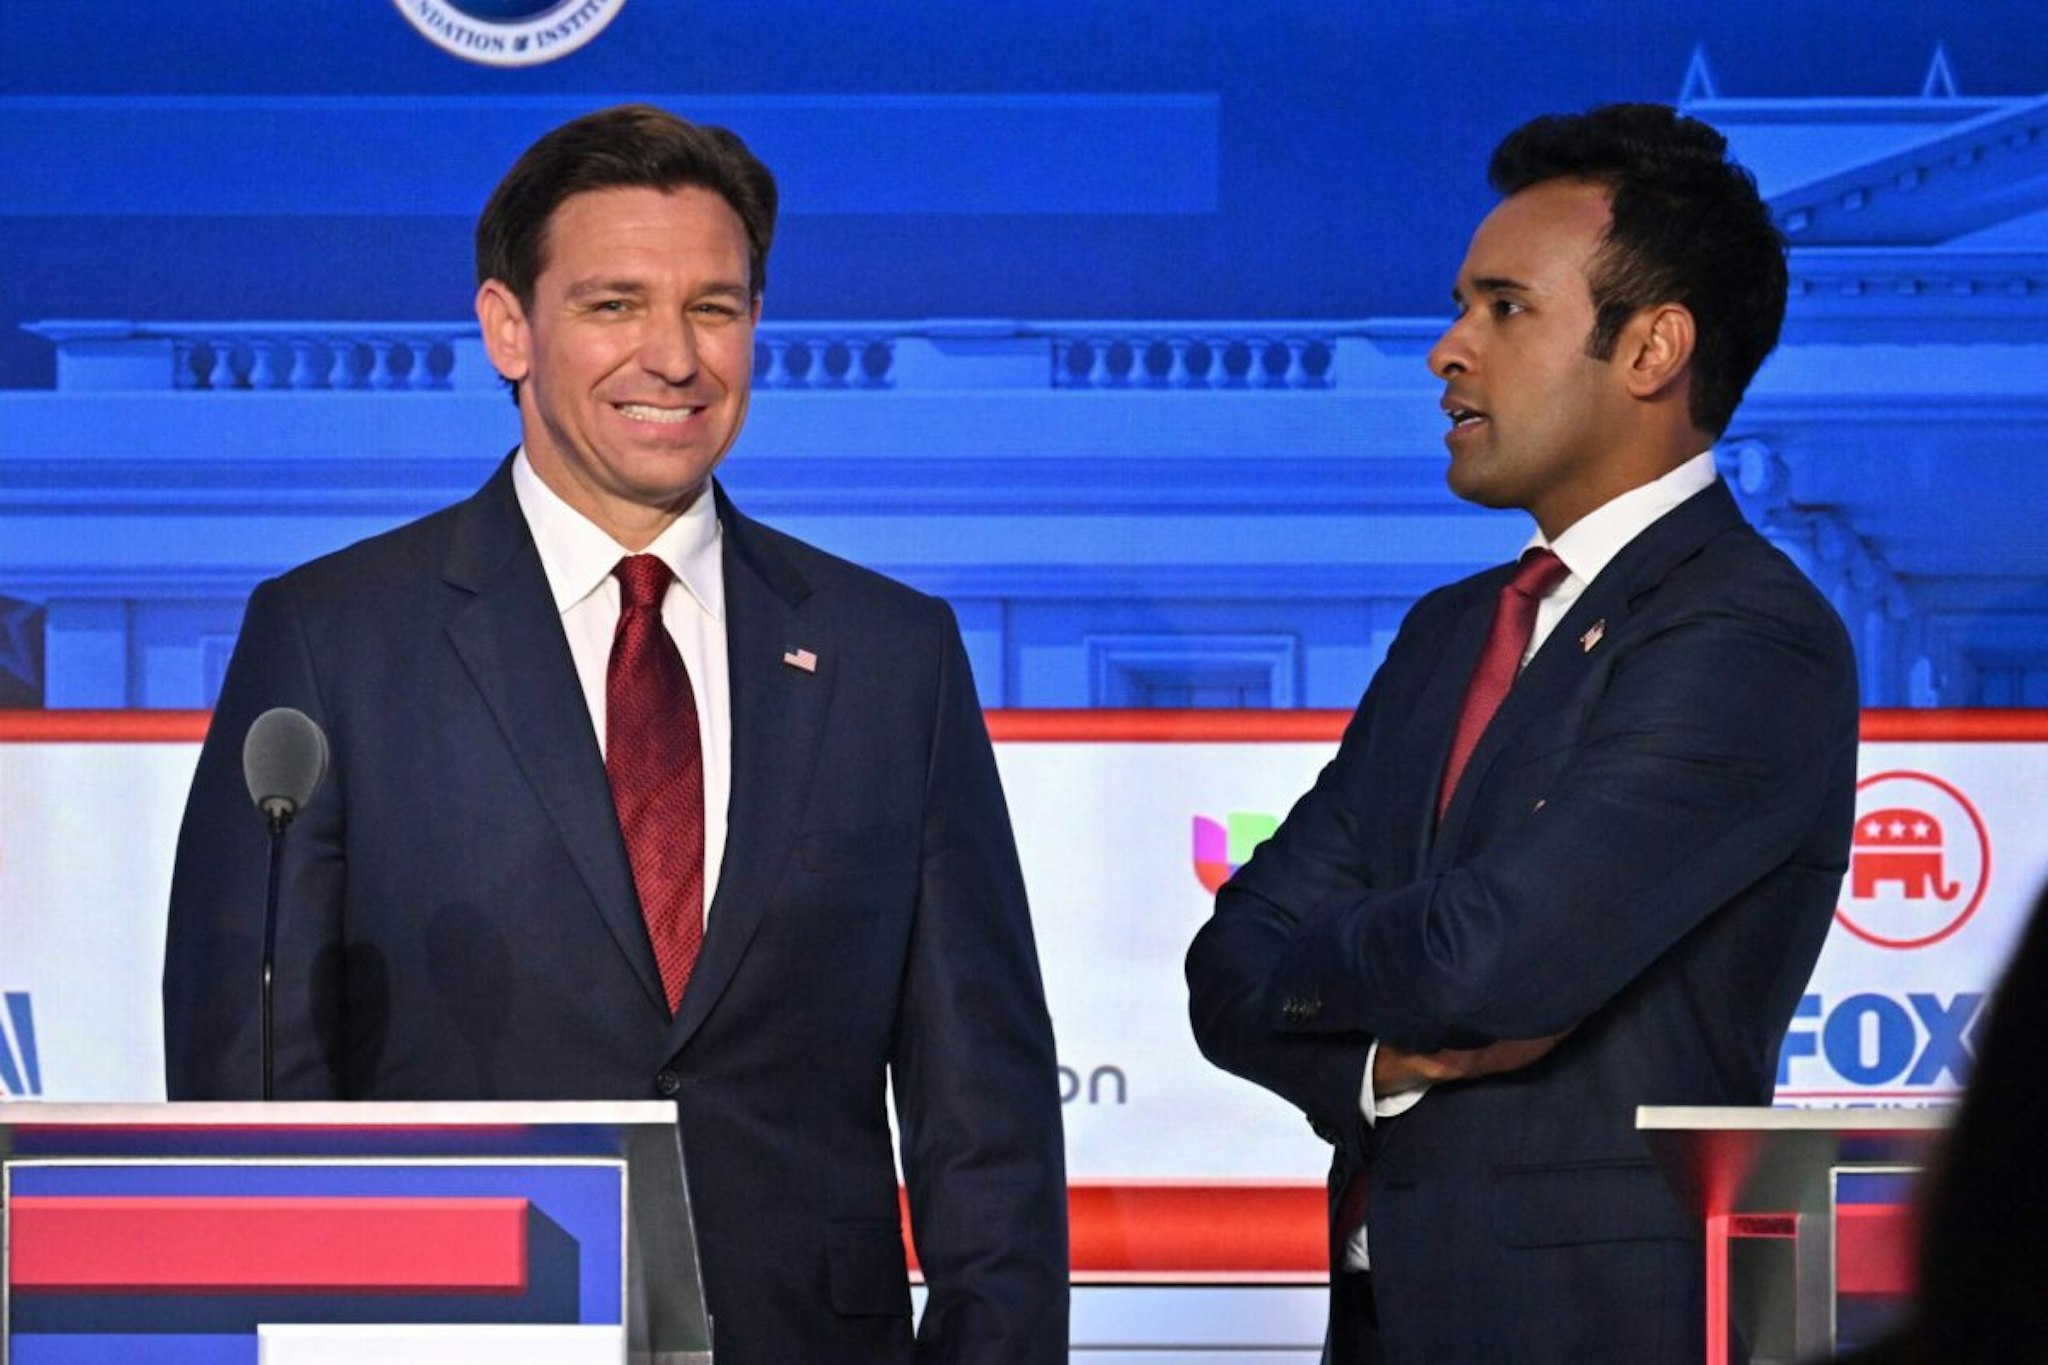 Entrepreneur Vivek Ramaswamy (R) speaks to Florida Governor Ron DeSantis following the second Republican presidential primary debate at the Ronald Reagan Presidential Library in Simi Valley, California, on September 27, 2023.